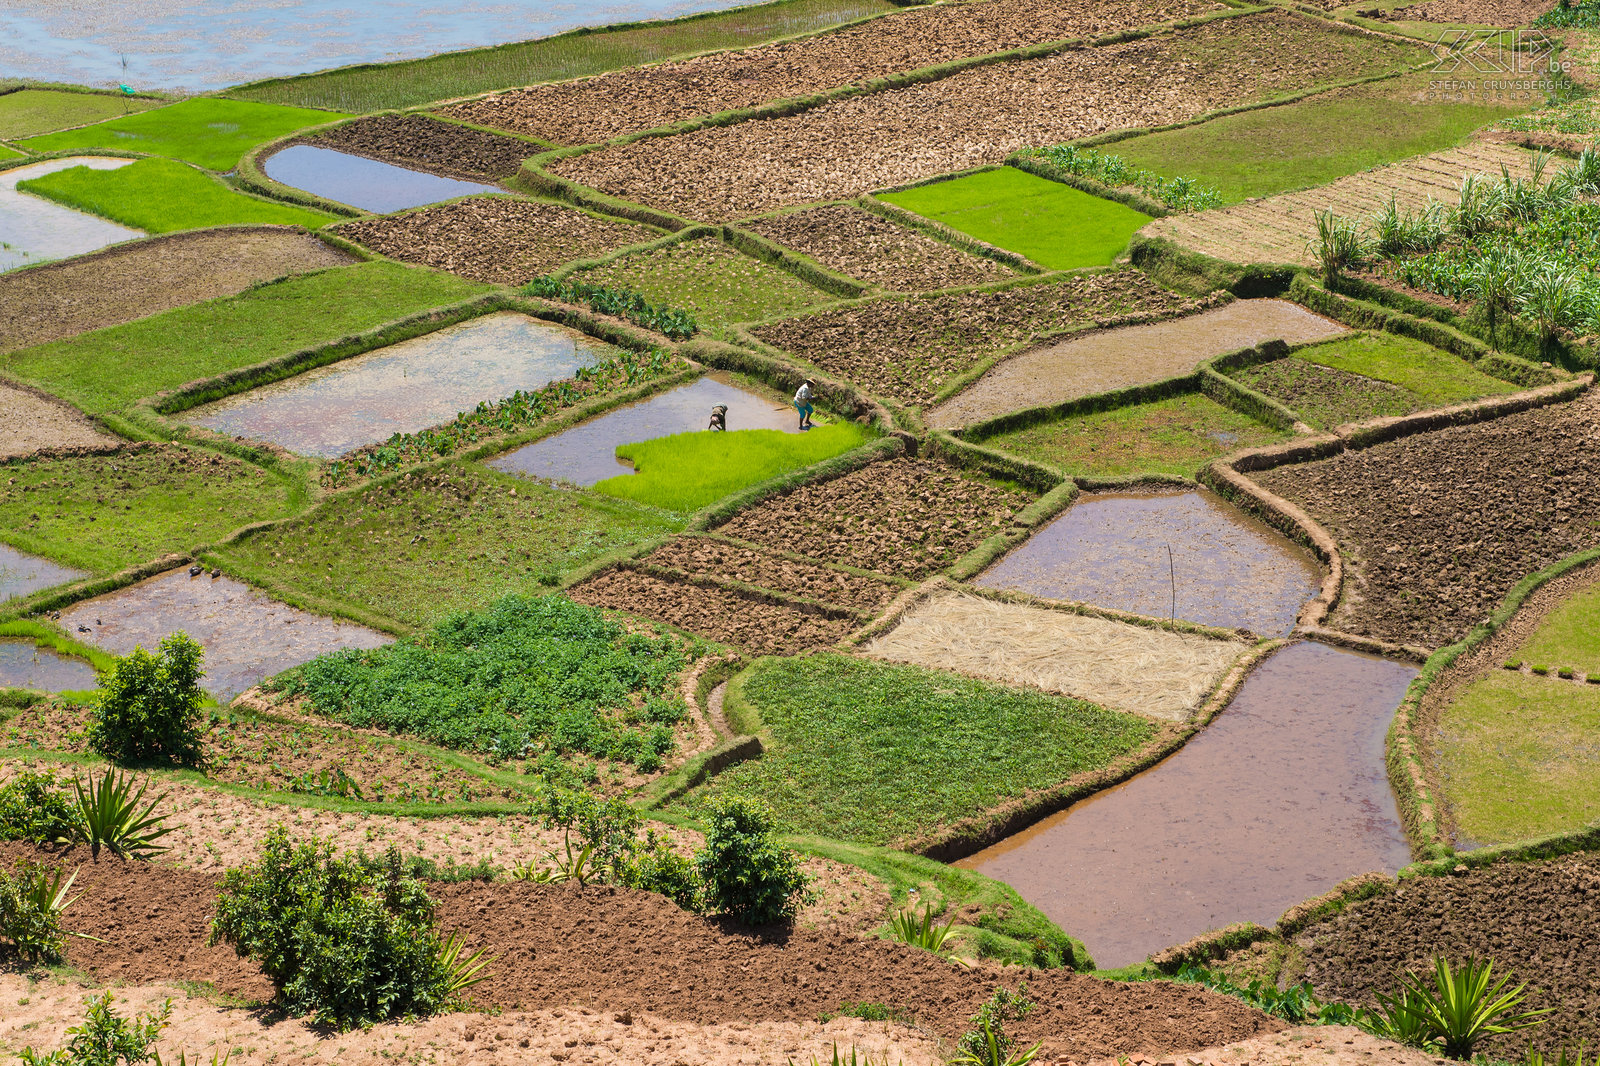 Befato - Rice paddies The region around the city Antsirabe is situated at an altitude of about 1200m to 1600m making its climate subtropical highland. This is perfect for farming and in the region is full of terraces and paddy fields with rice and vegetables. Stefan Cruysberghs